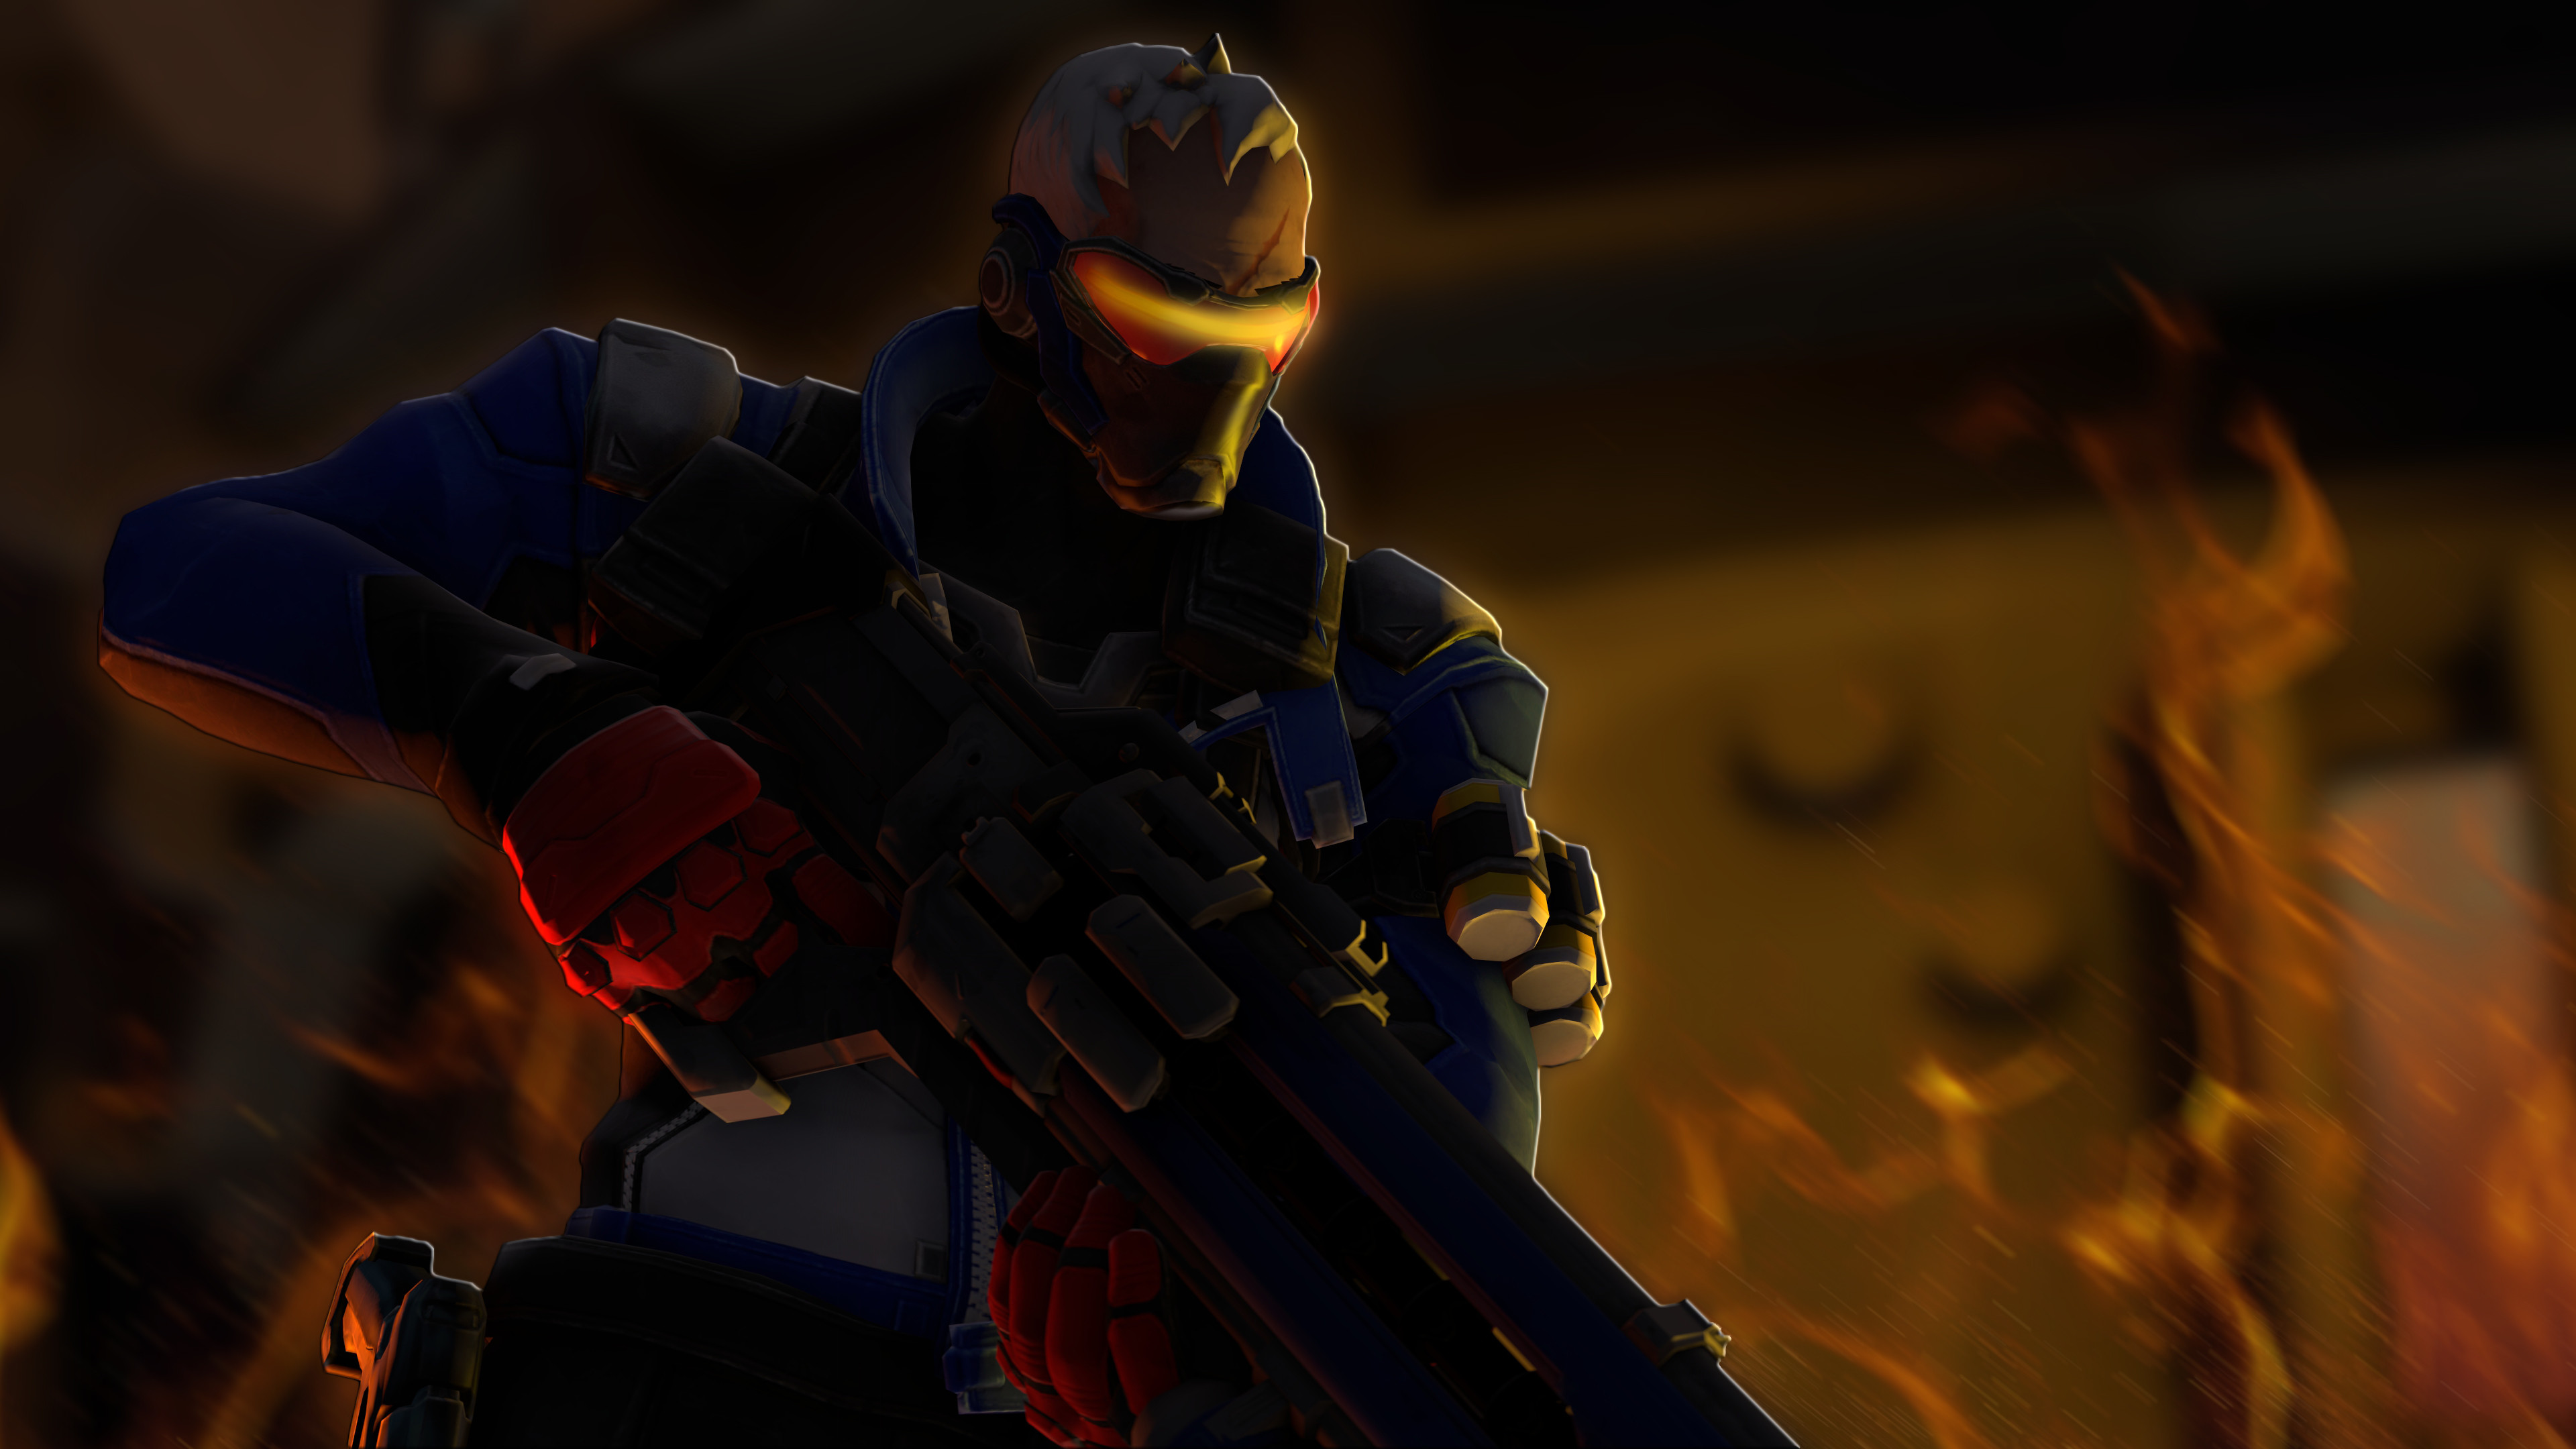 3840x2160 75 Soldier: 76 (Overwatch) HD Wallpapers | Backgrounds - Wallpaper Abyss